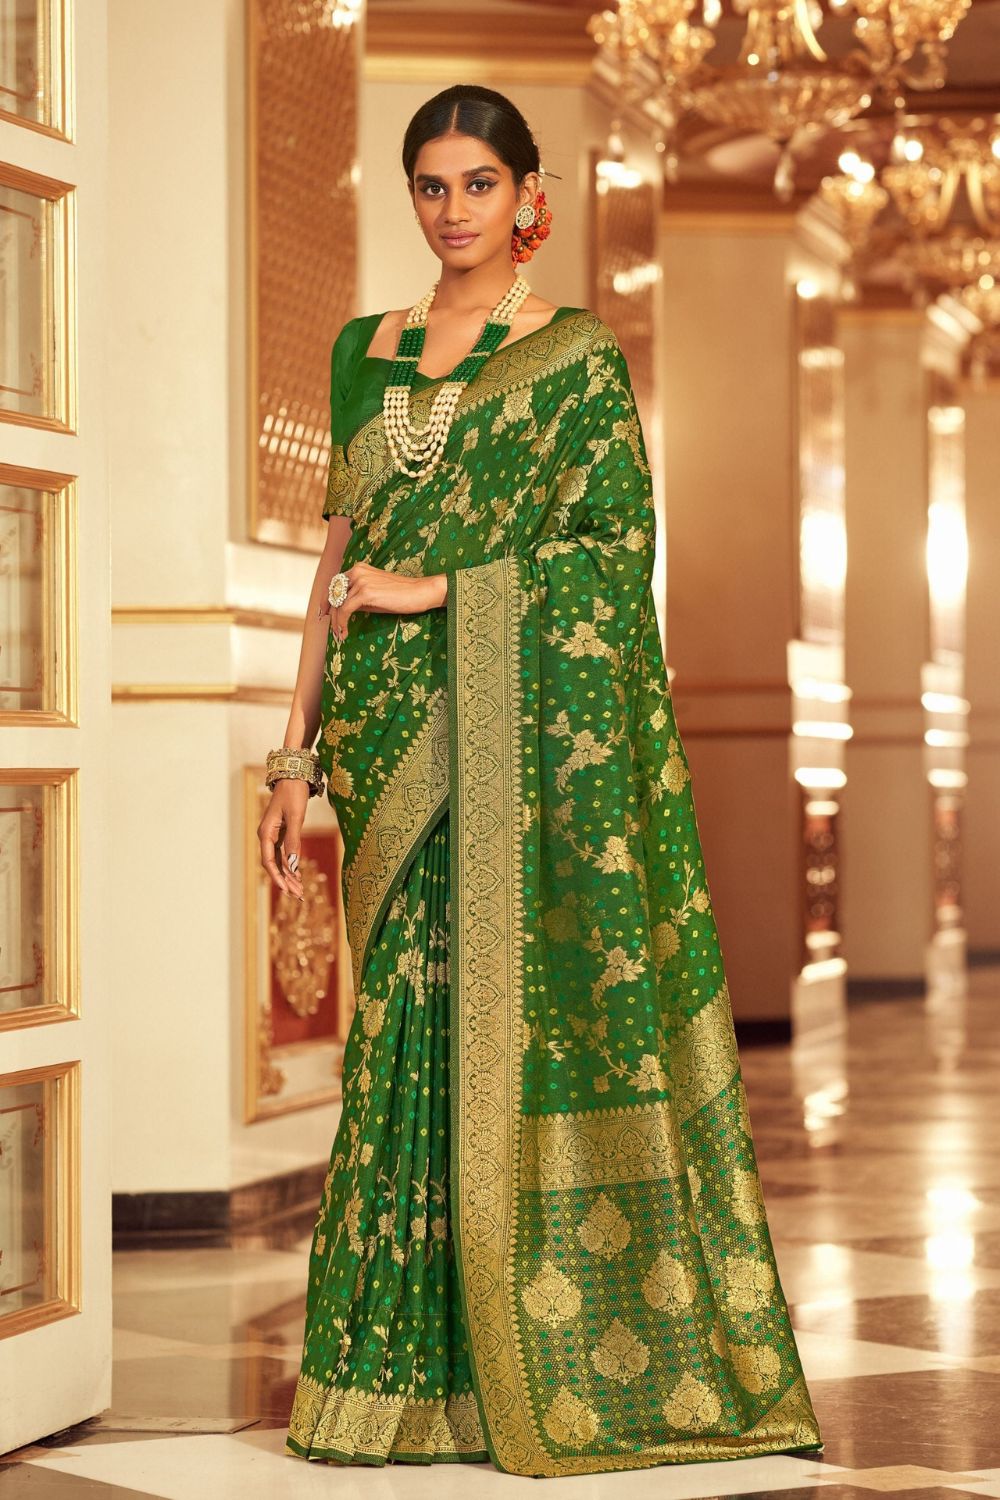 The Modest Fashion for Summers - Dark Green Bandhani Saree - Iraah.Store